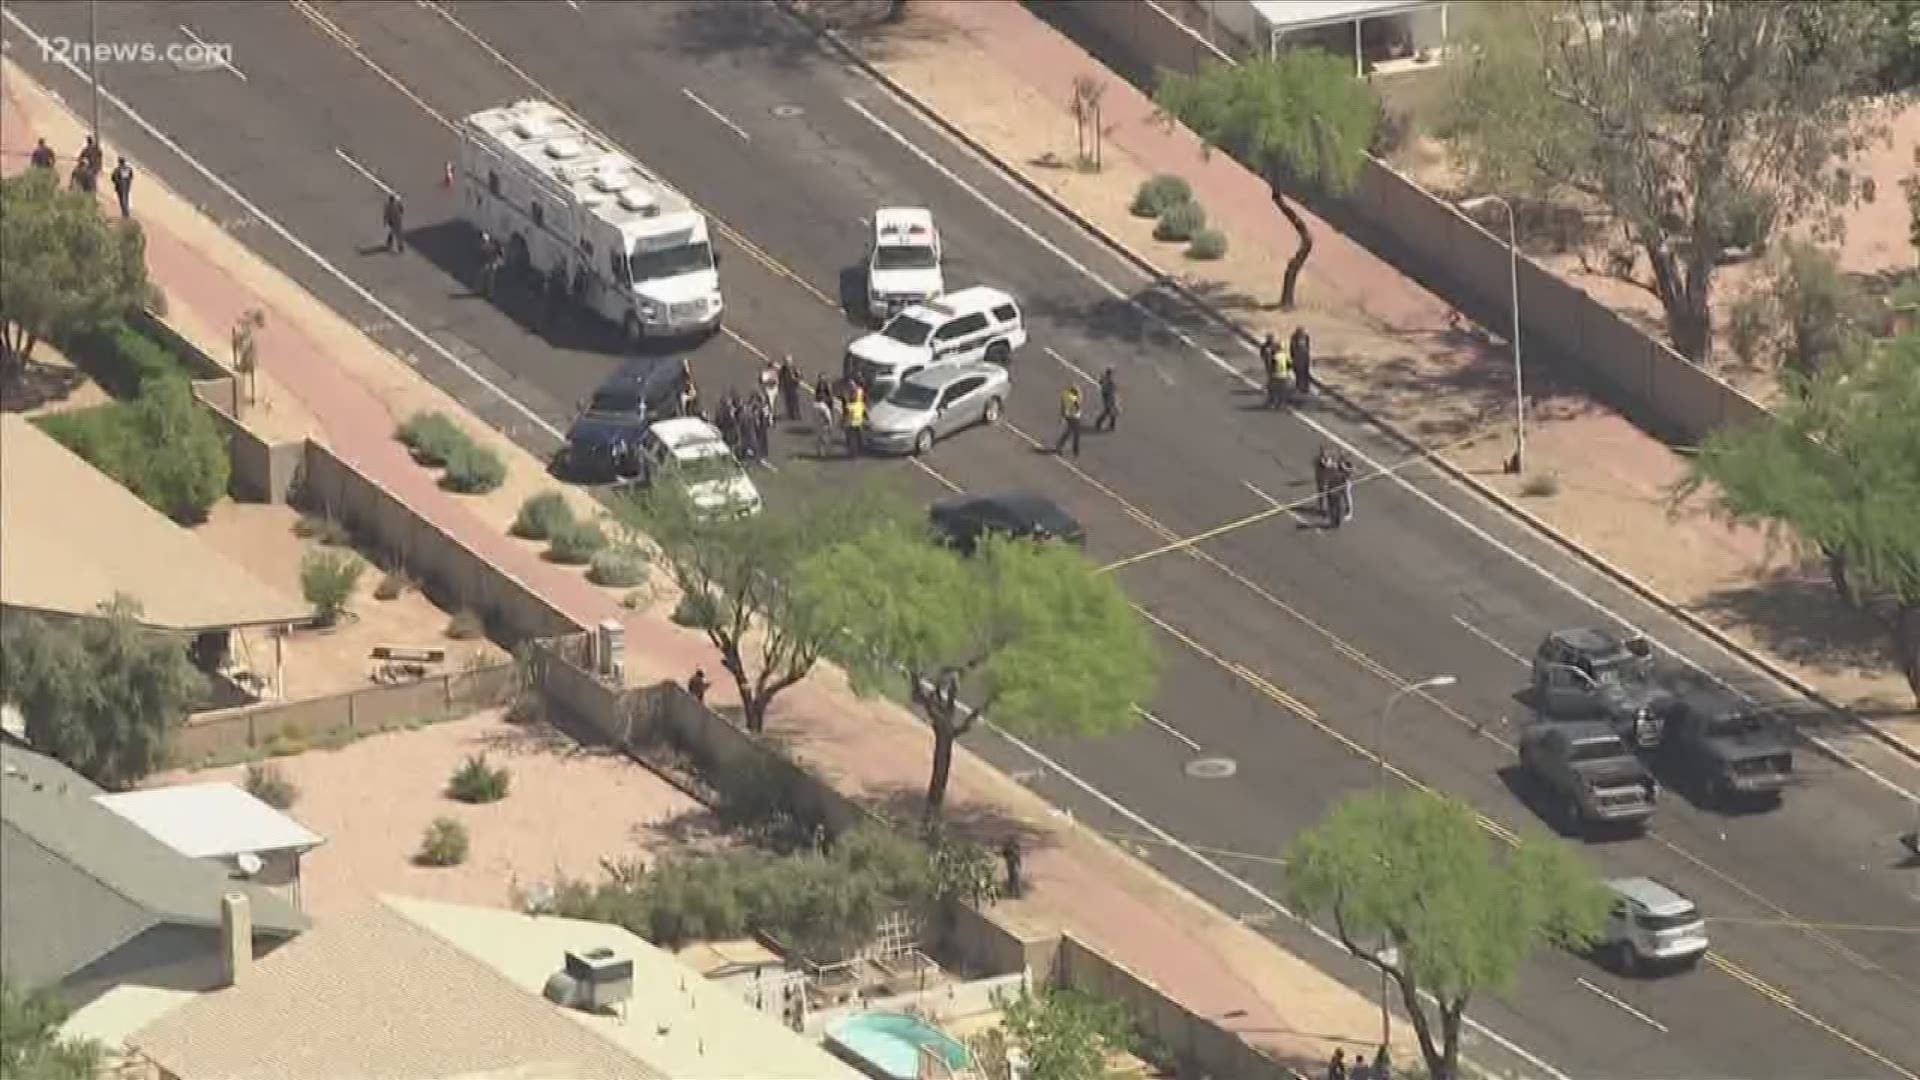 Phoenix police say a woman who was in the suspect vehicle during the shootout died.